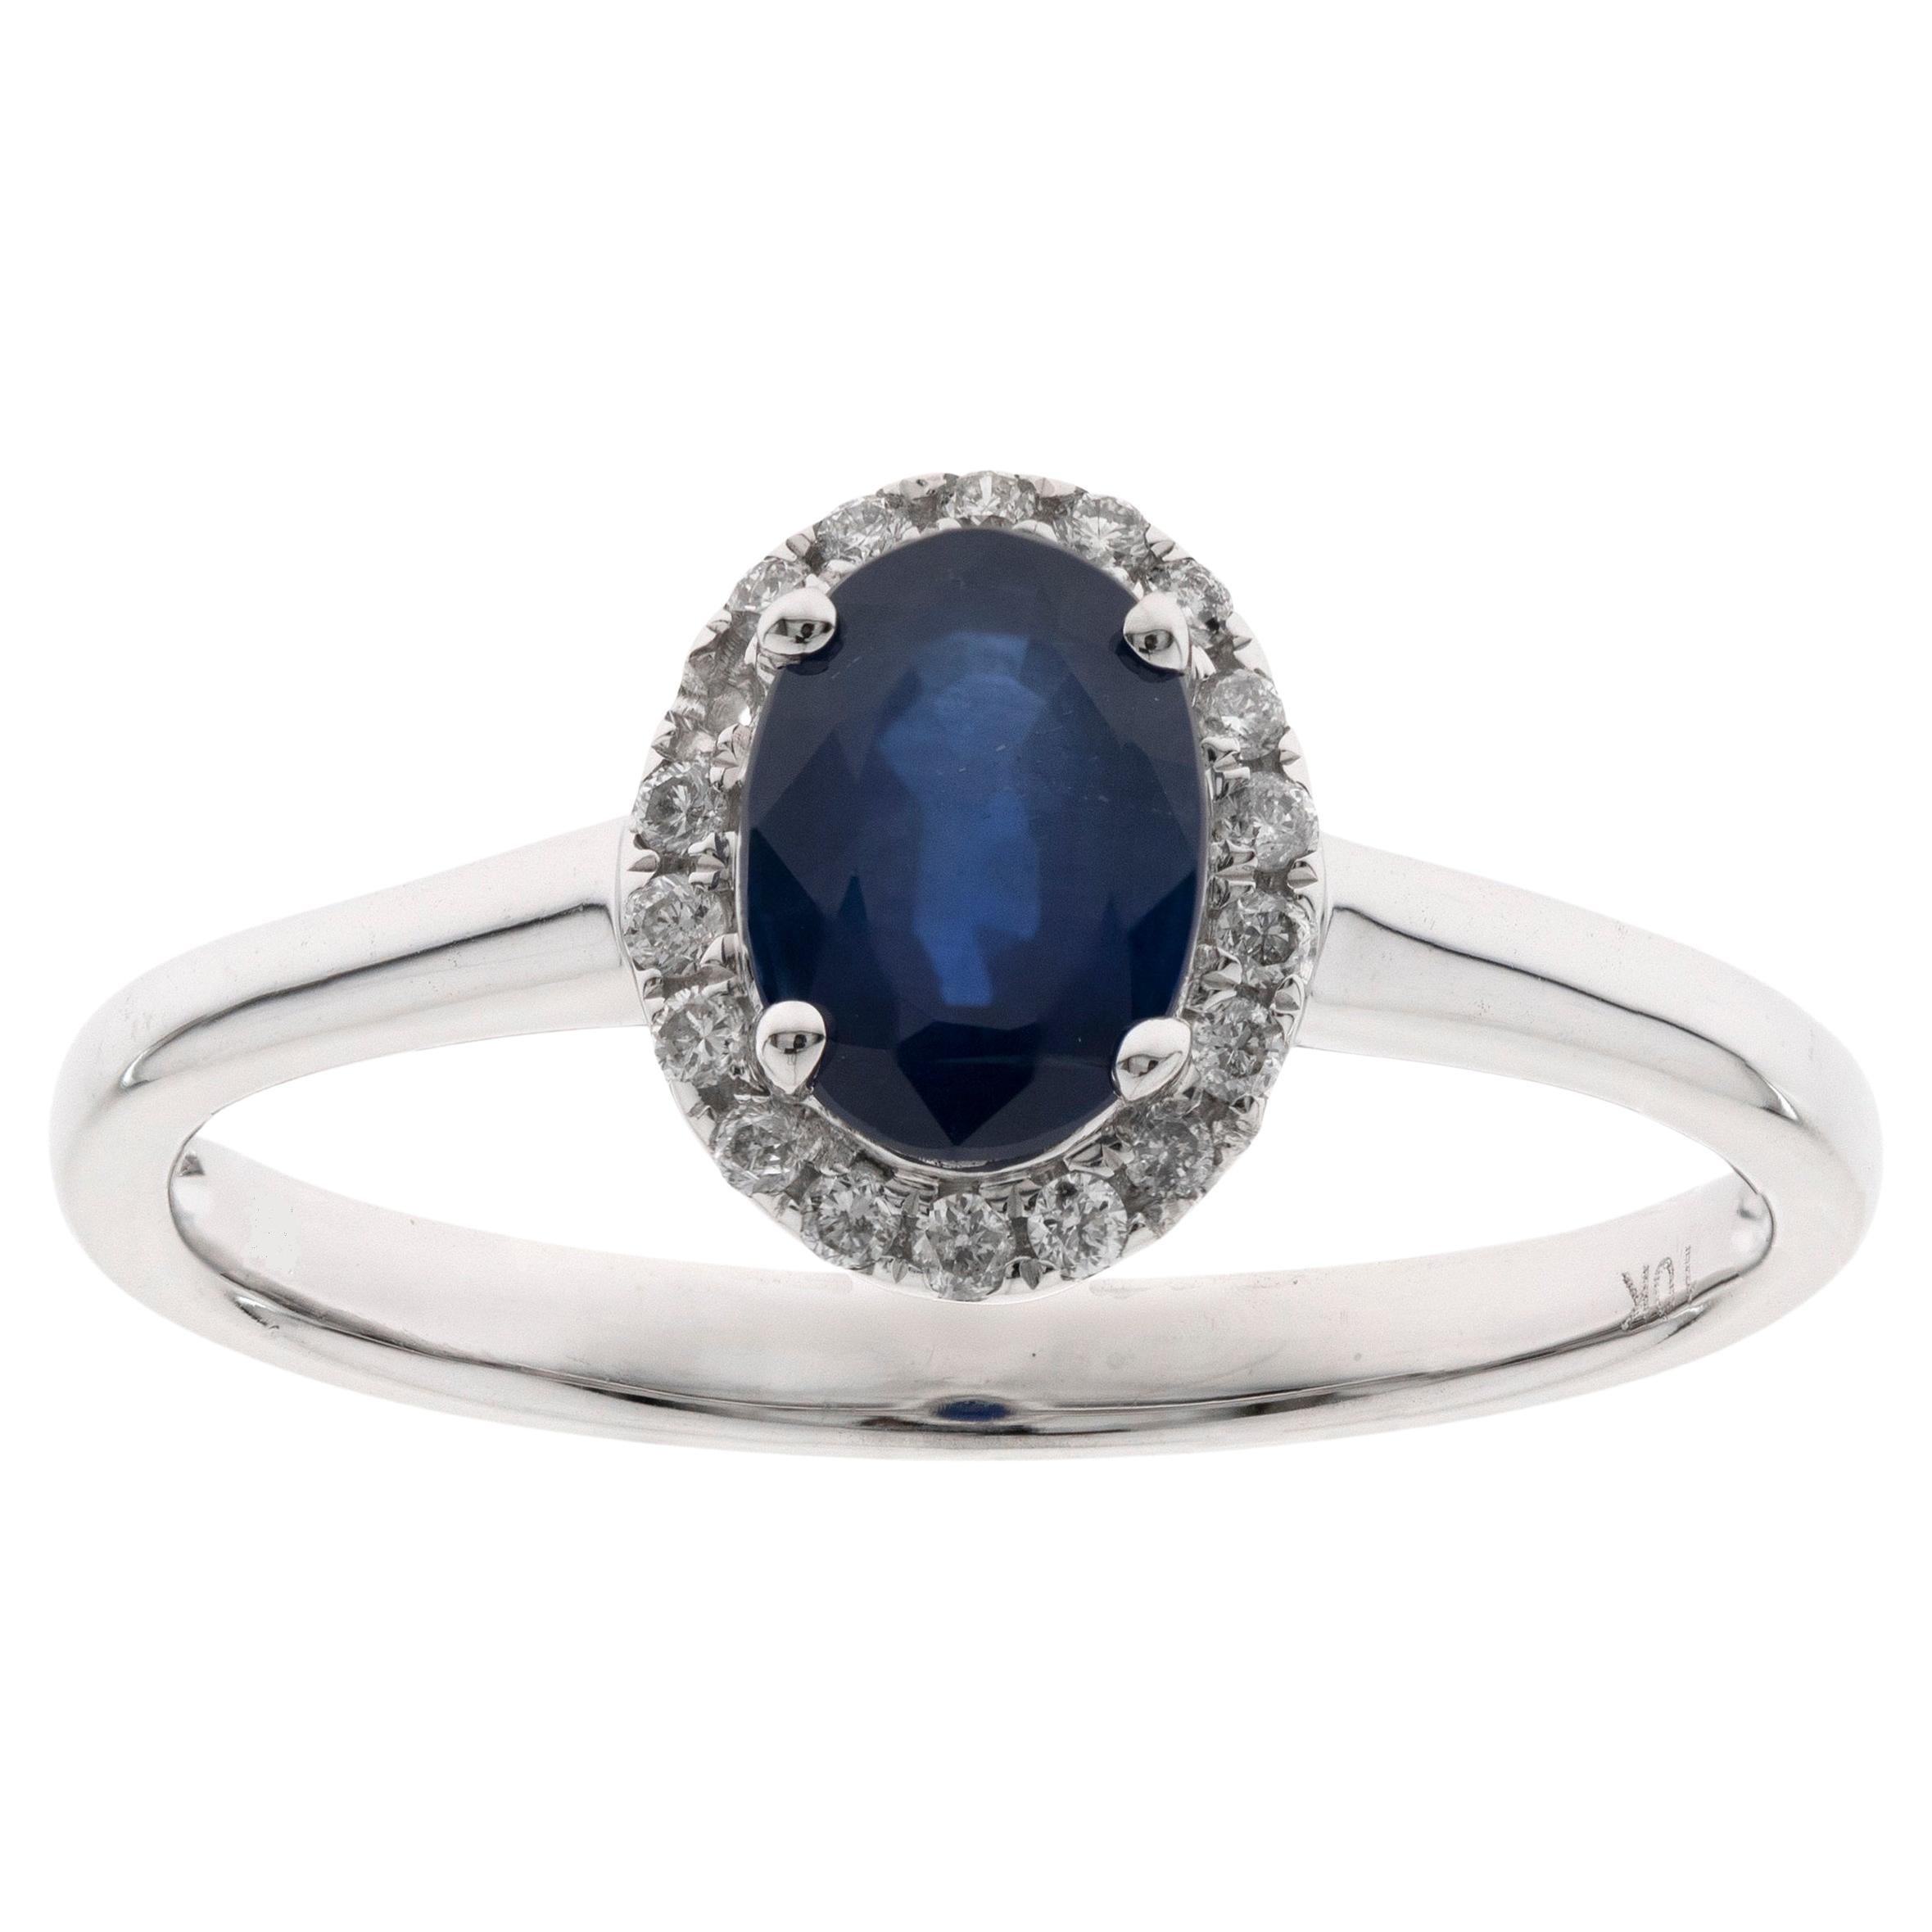 0.86 Carat Oval-Cut Blue Sapphire with Diamond Accents 10K White Gold Ring